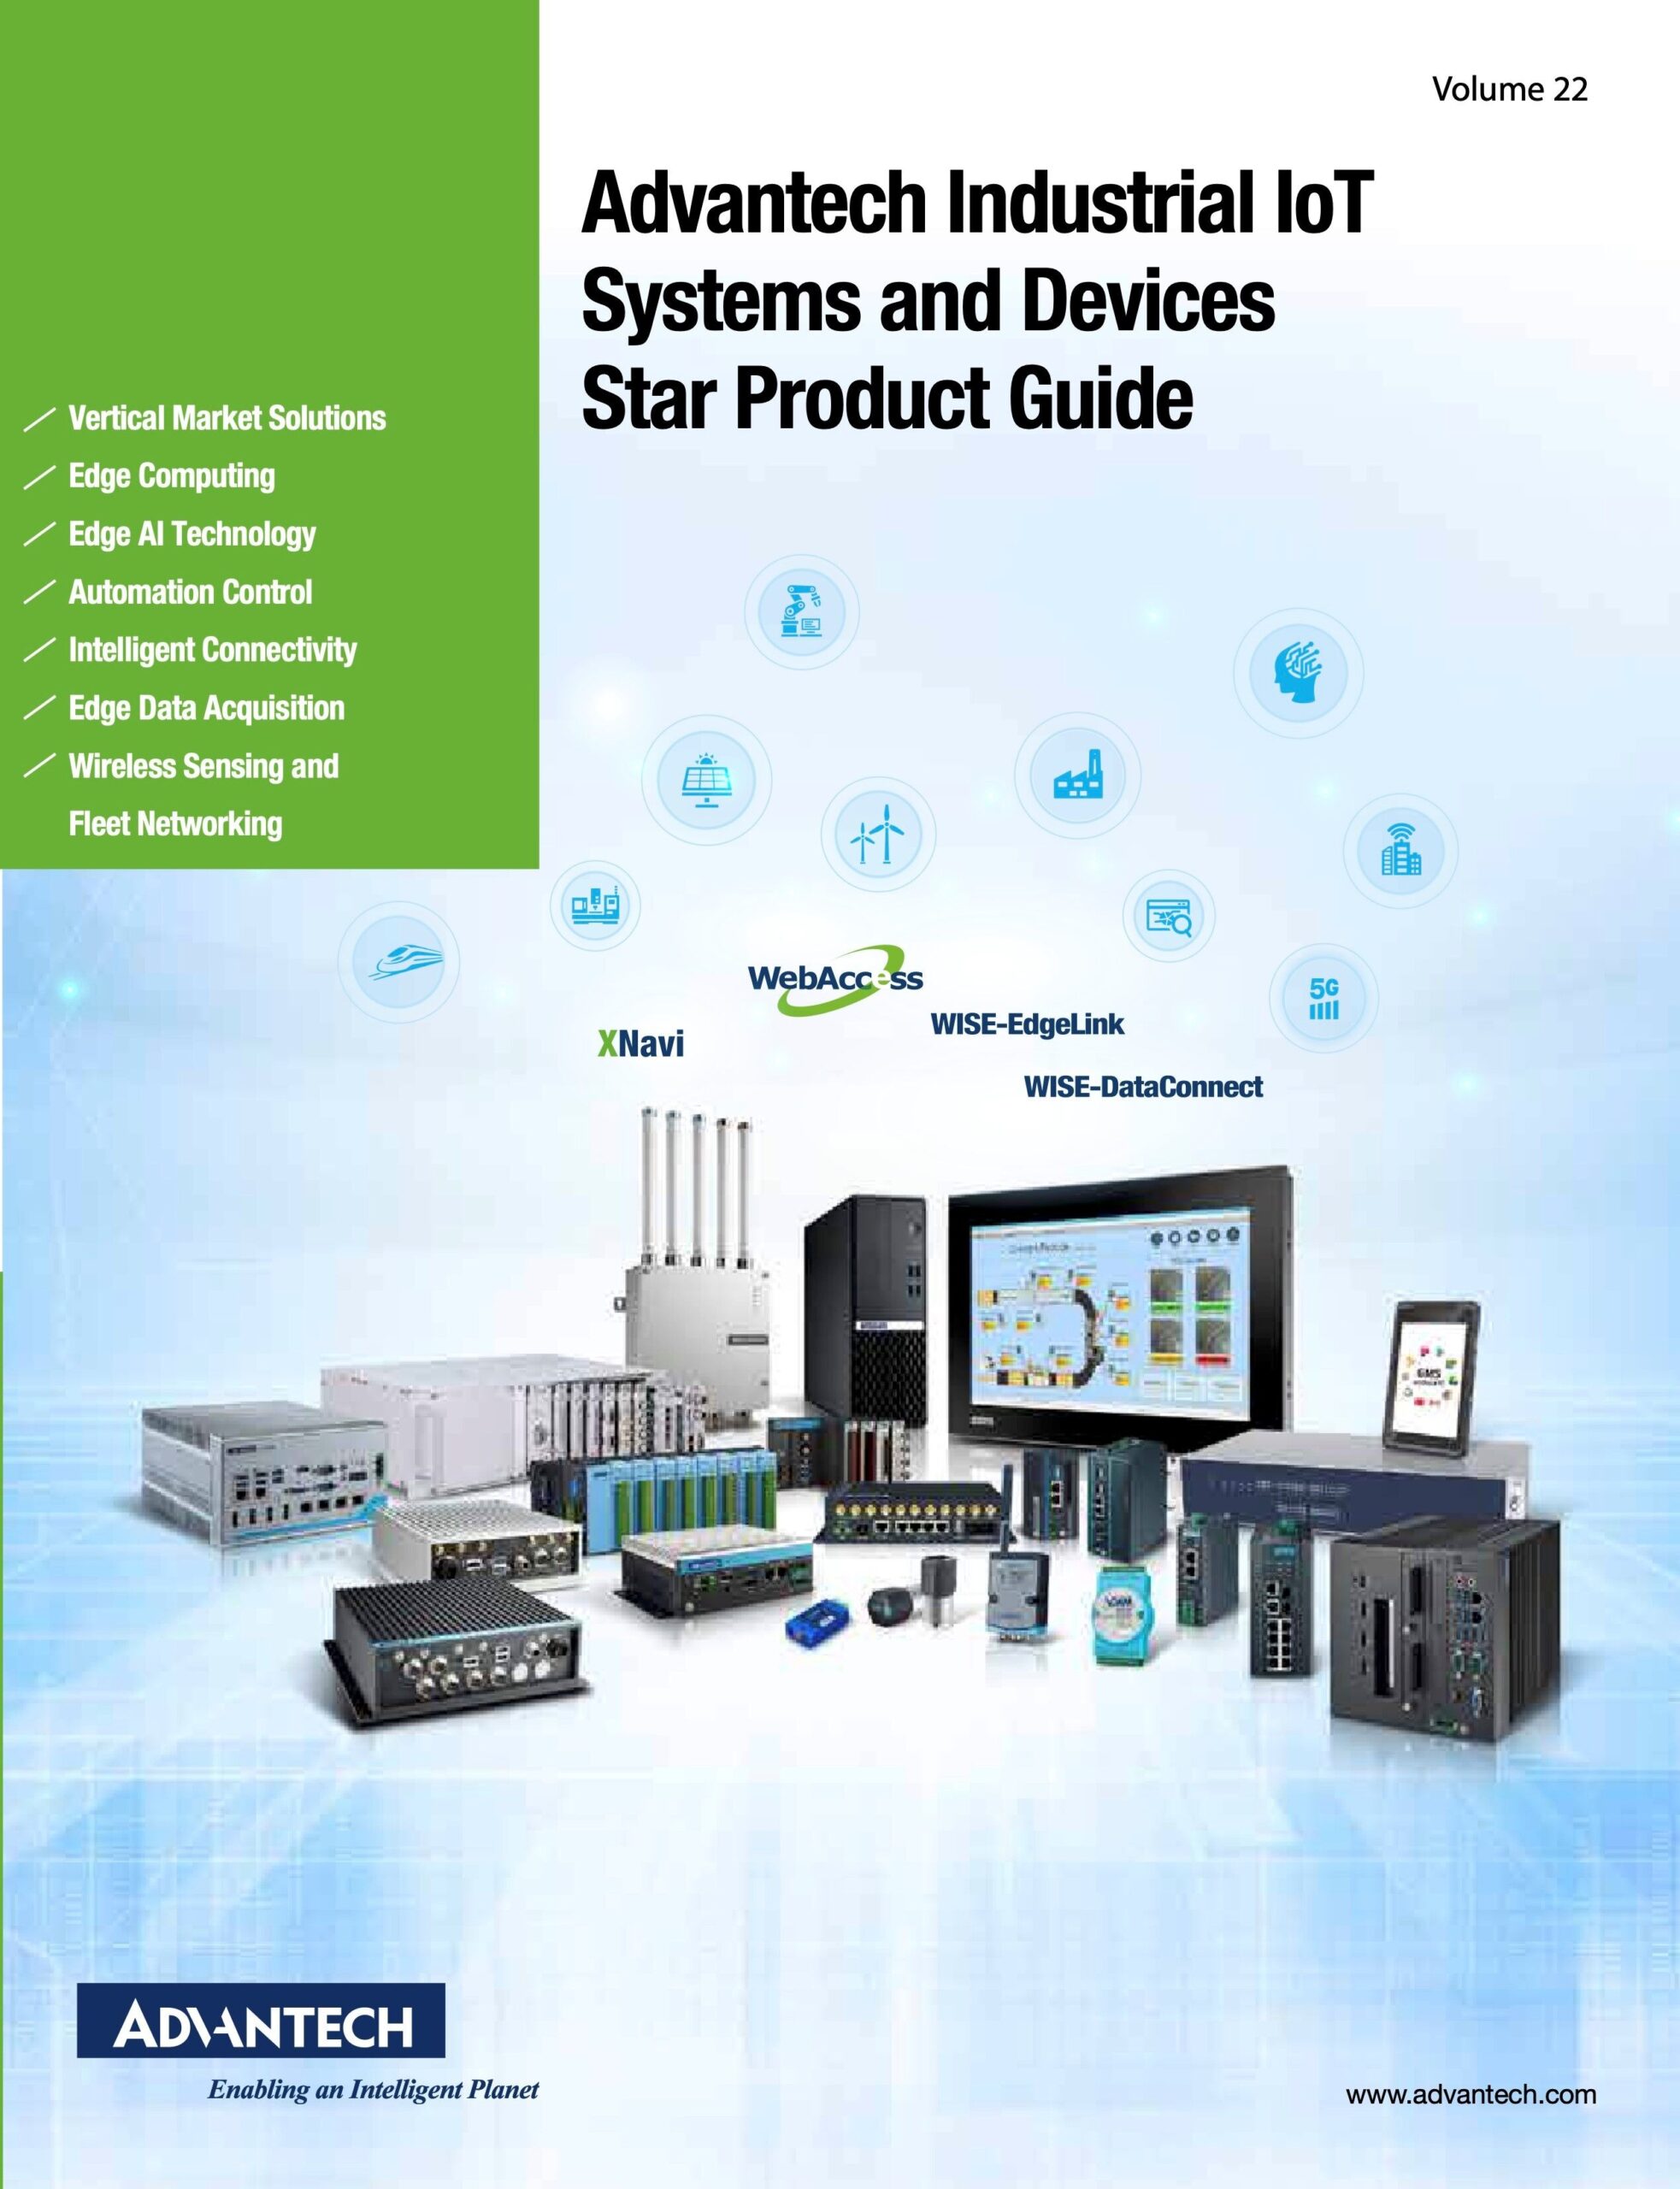 New Industrial IoT Star Product catalogue available from Advantech